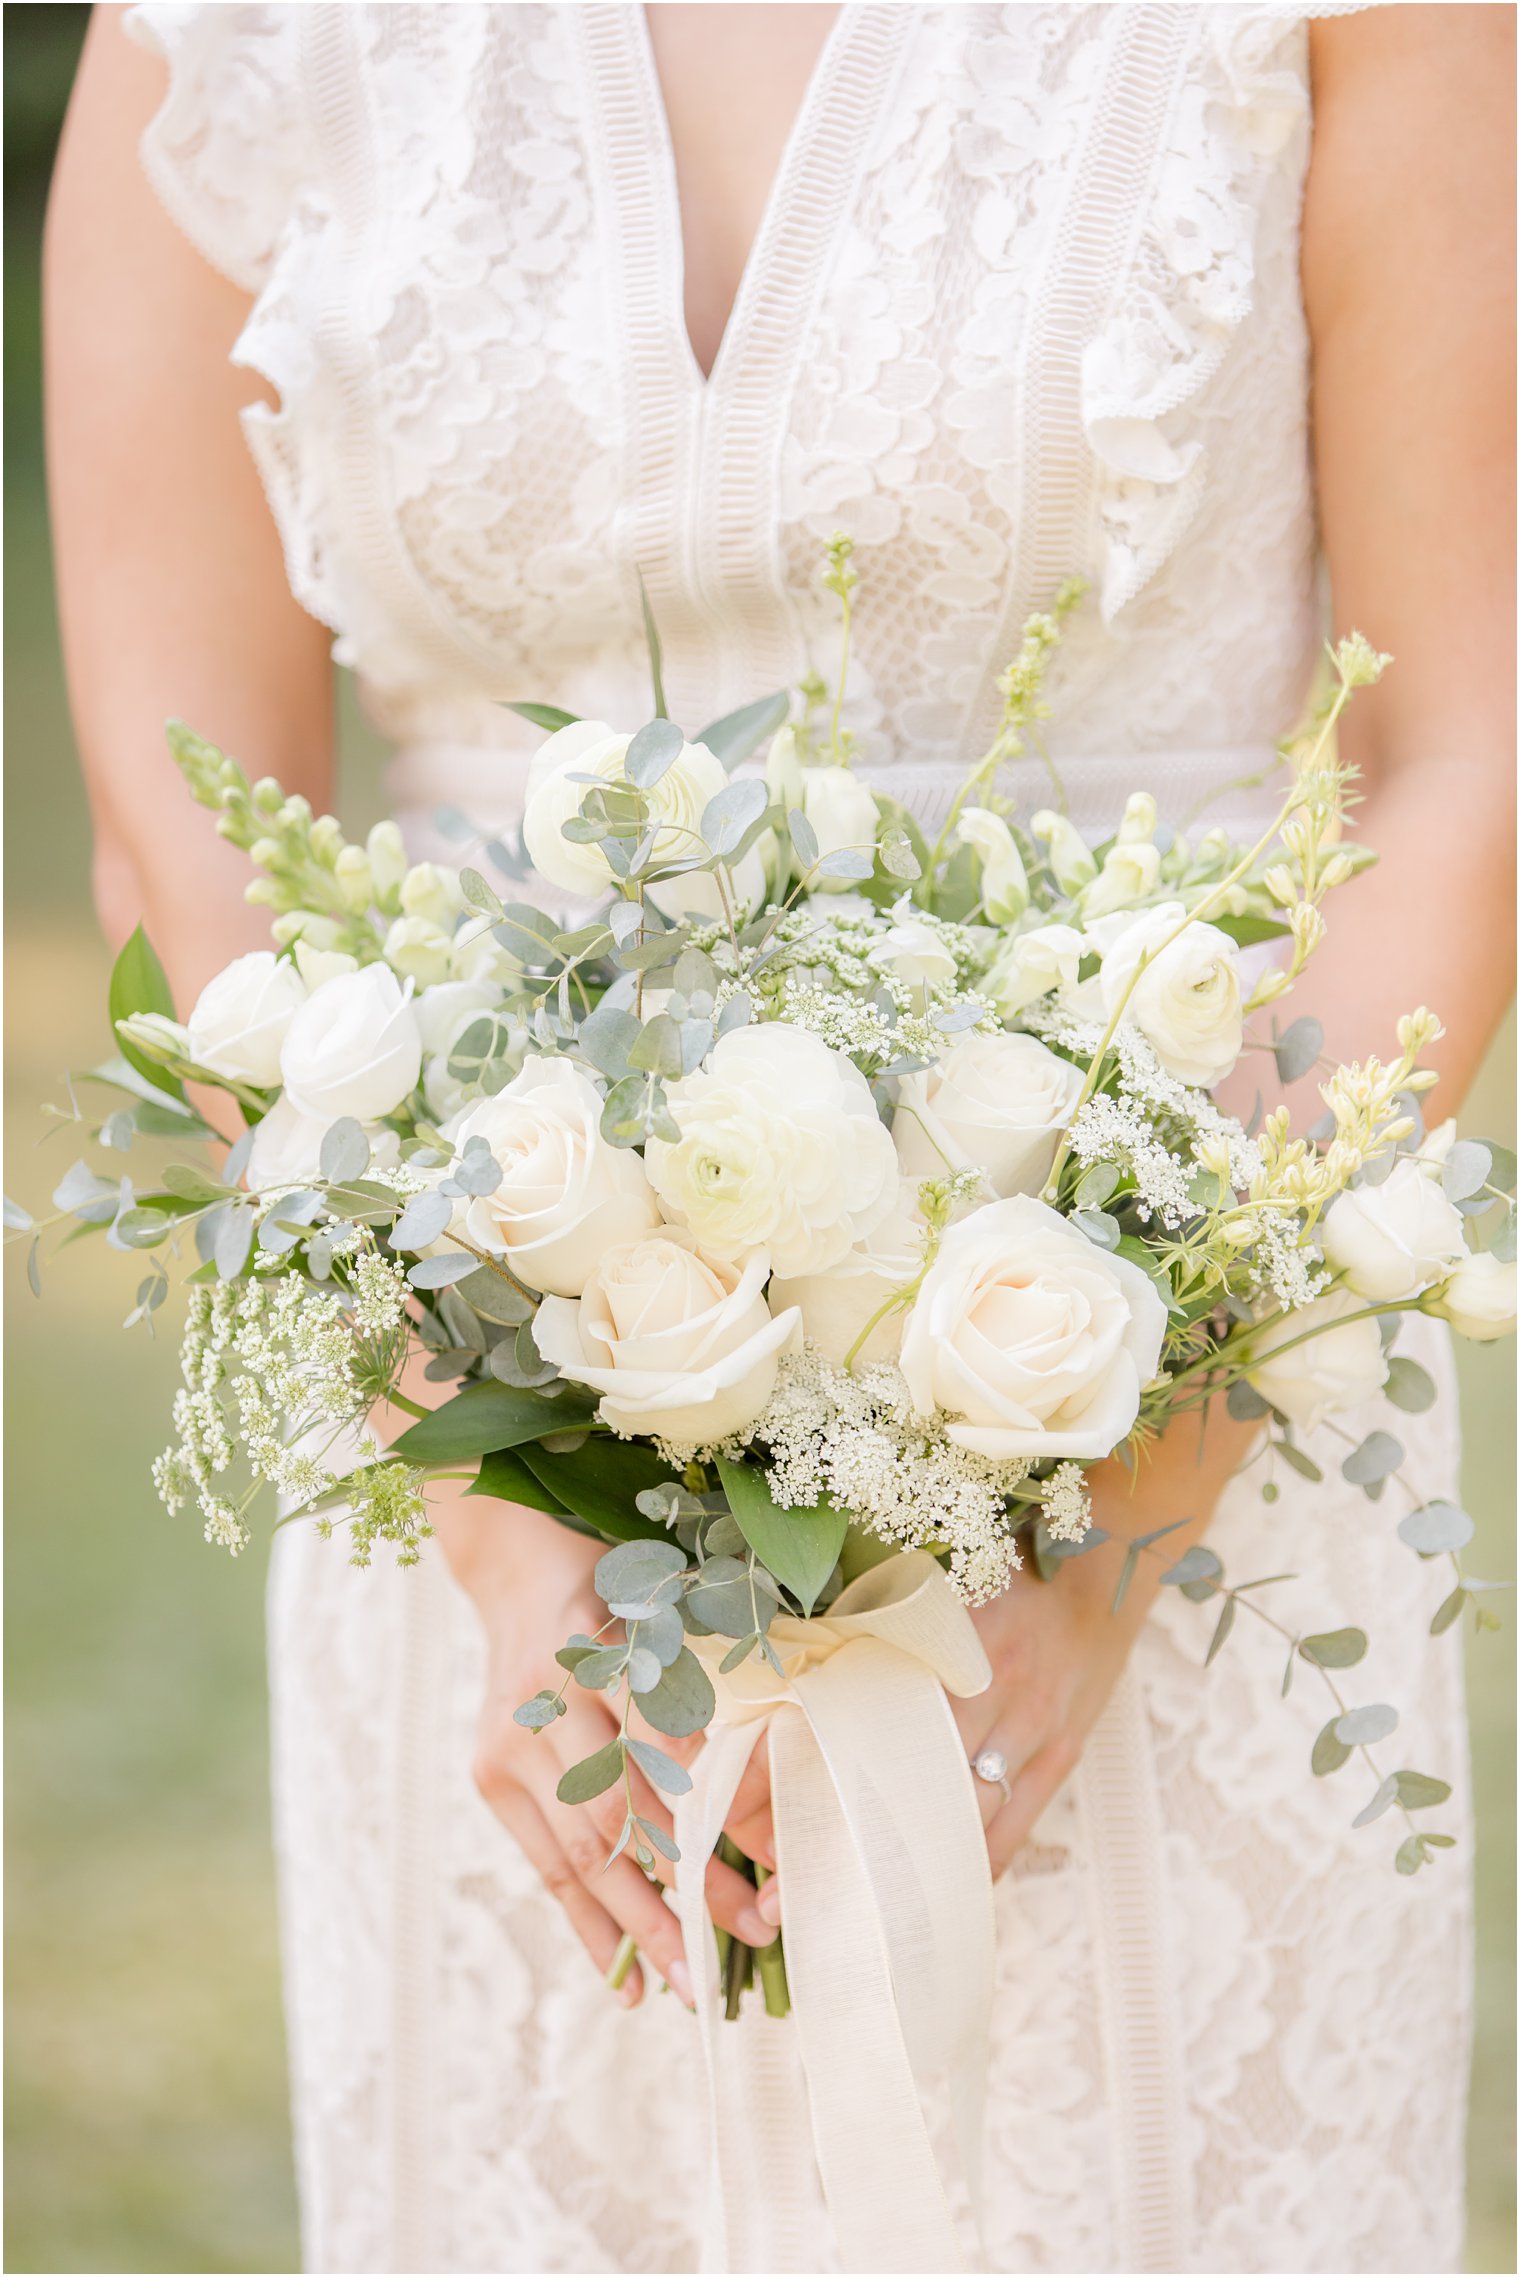 Gorgeous floral bouquet by Florals by Sofie